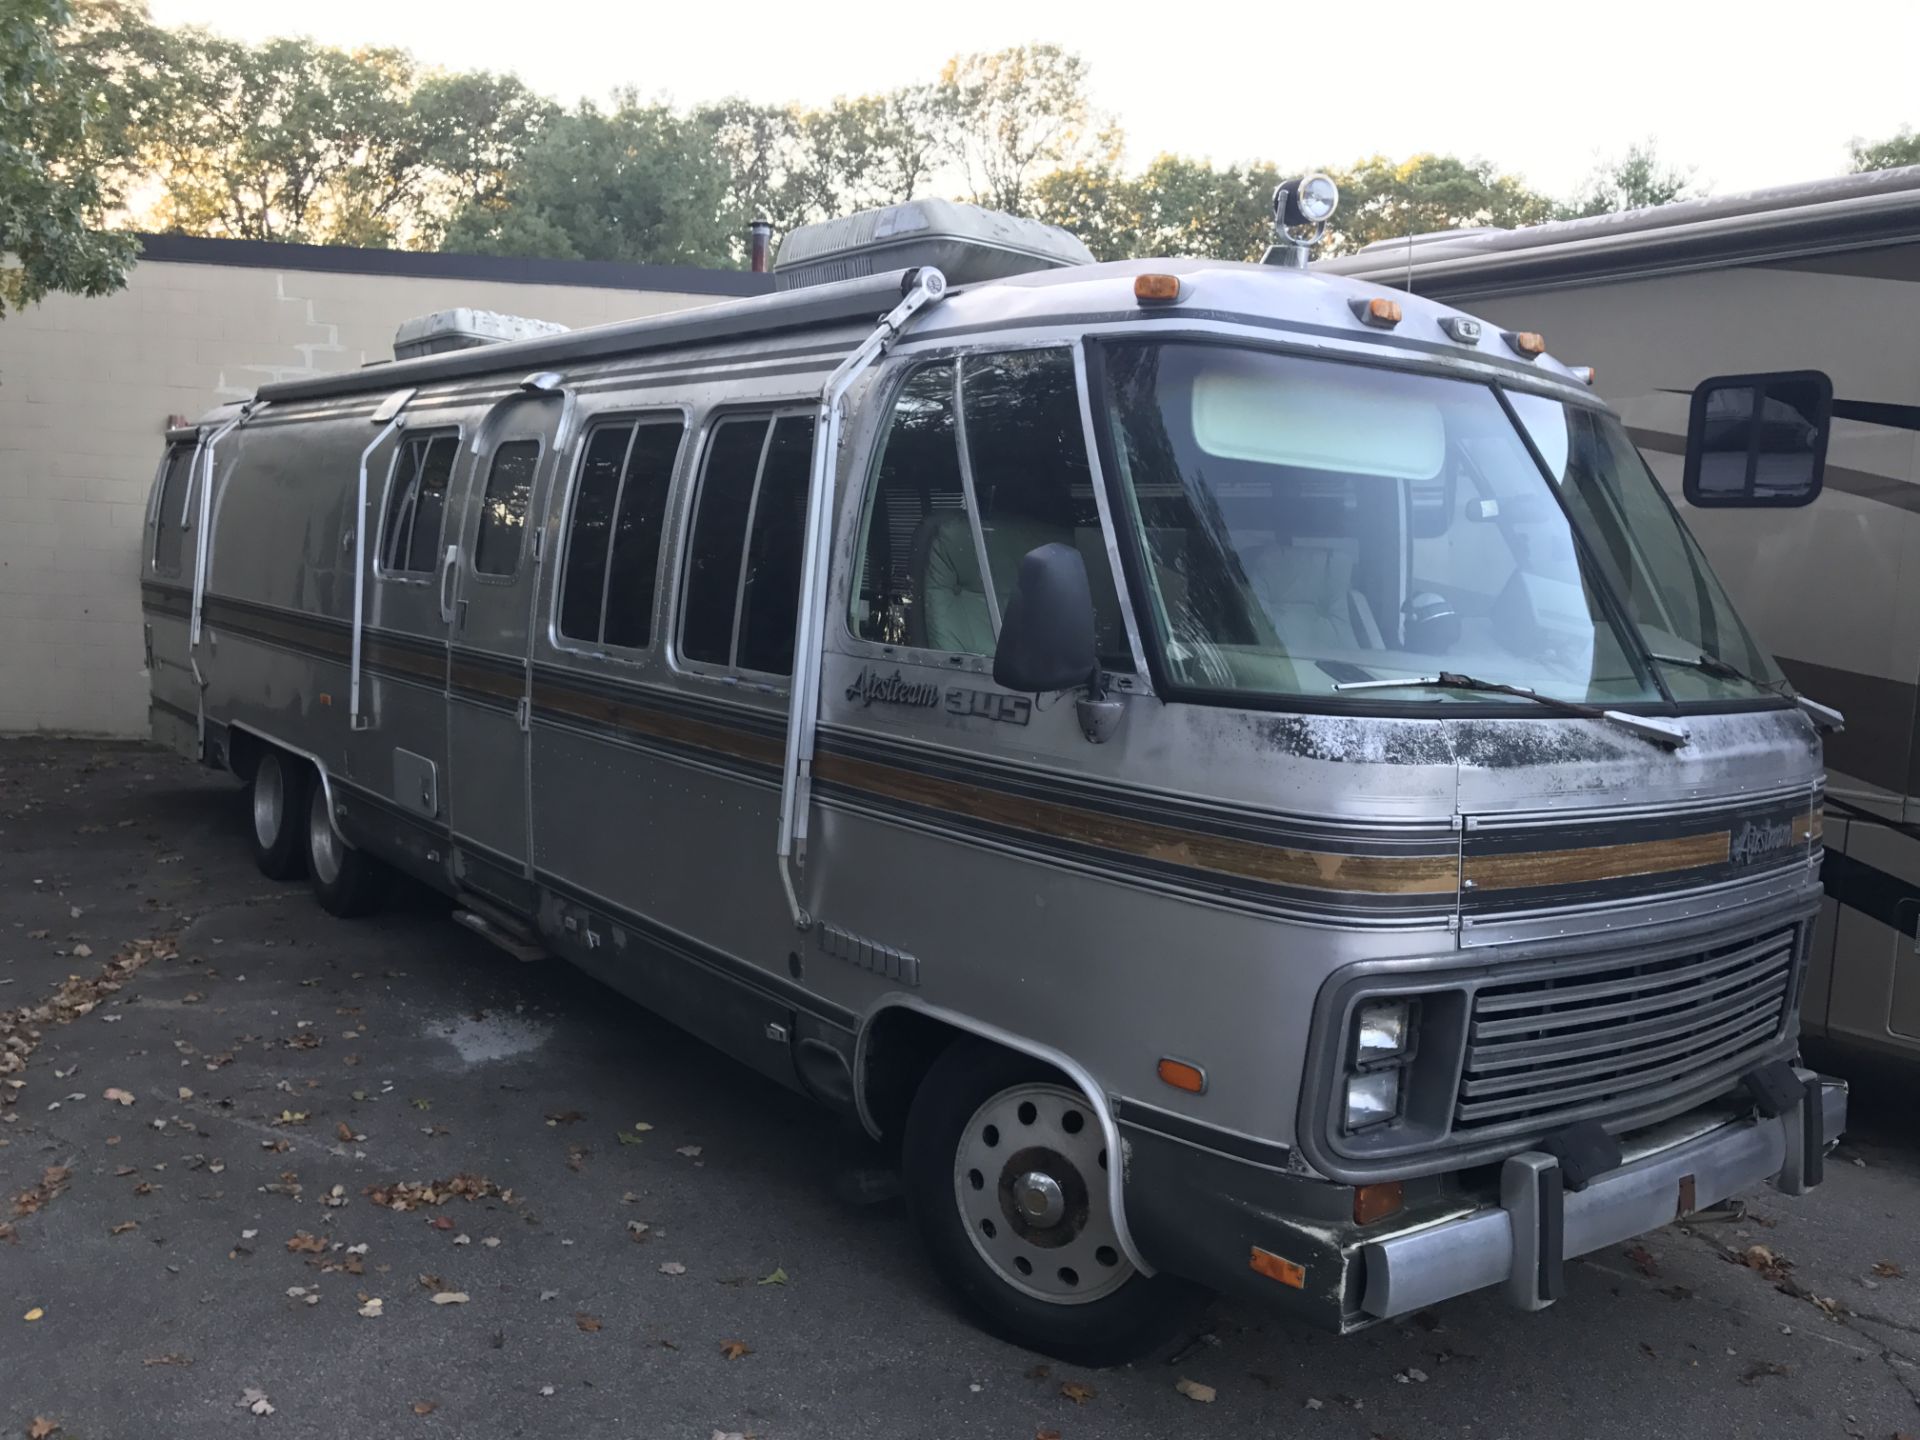 1986 Airstream #345 Motorhome -- More Info To Come - Image 3 of 10